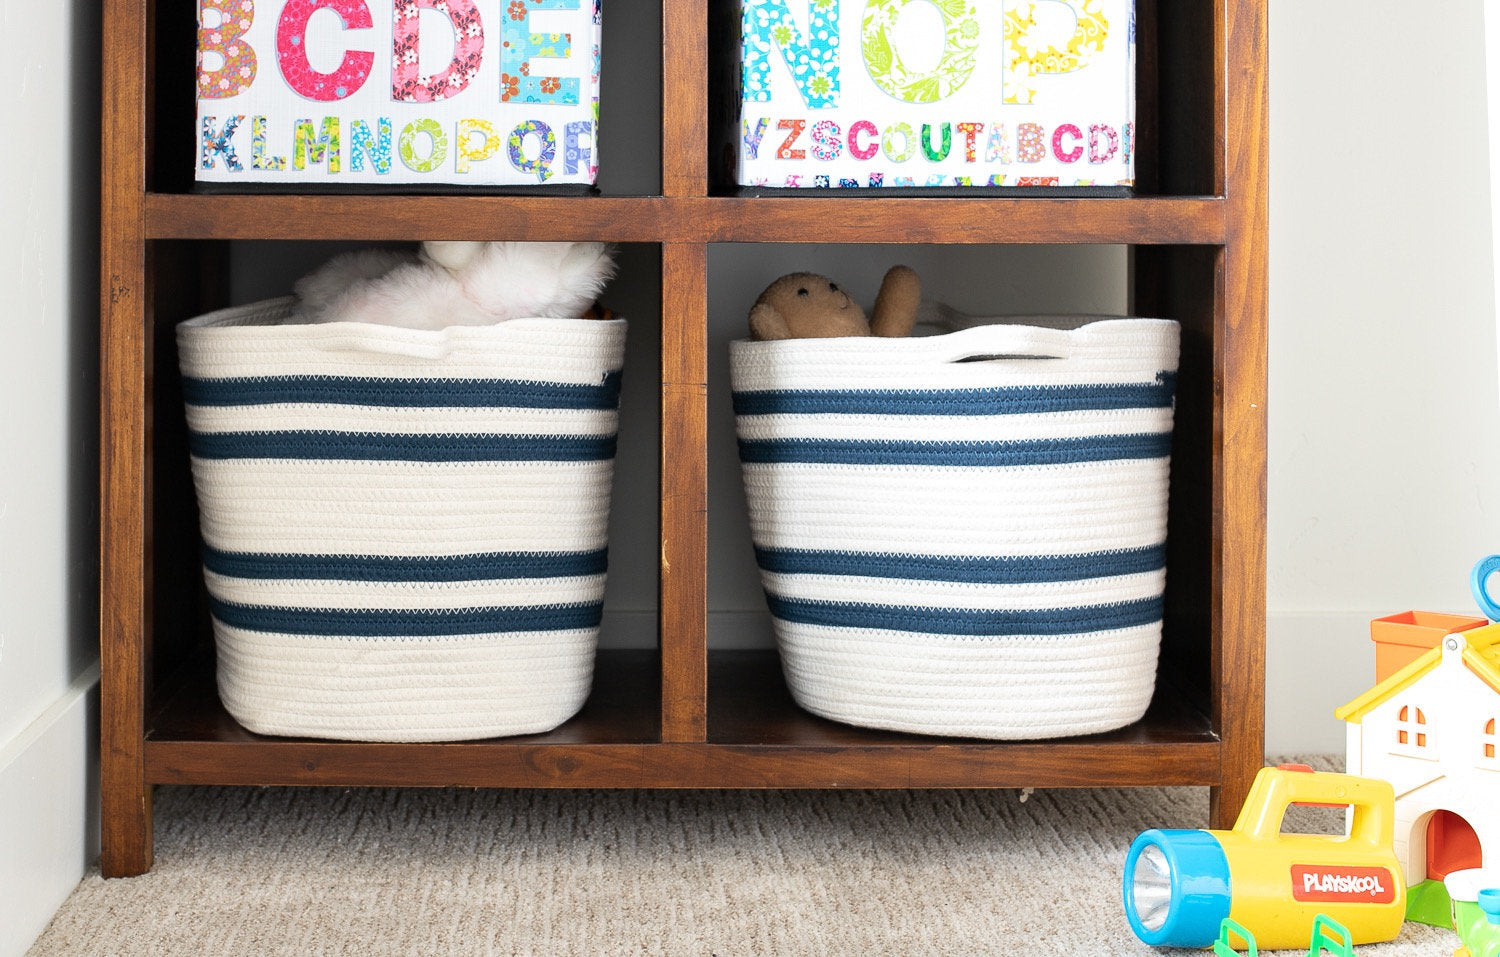 Set of Two Navy and White Stripe Cotton Rope Cubby Baskets